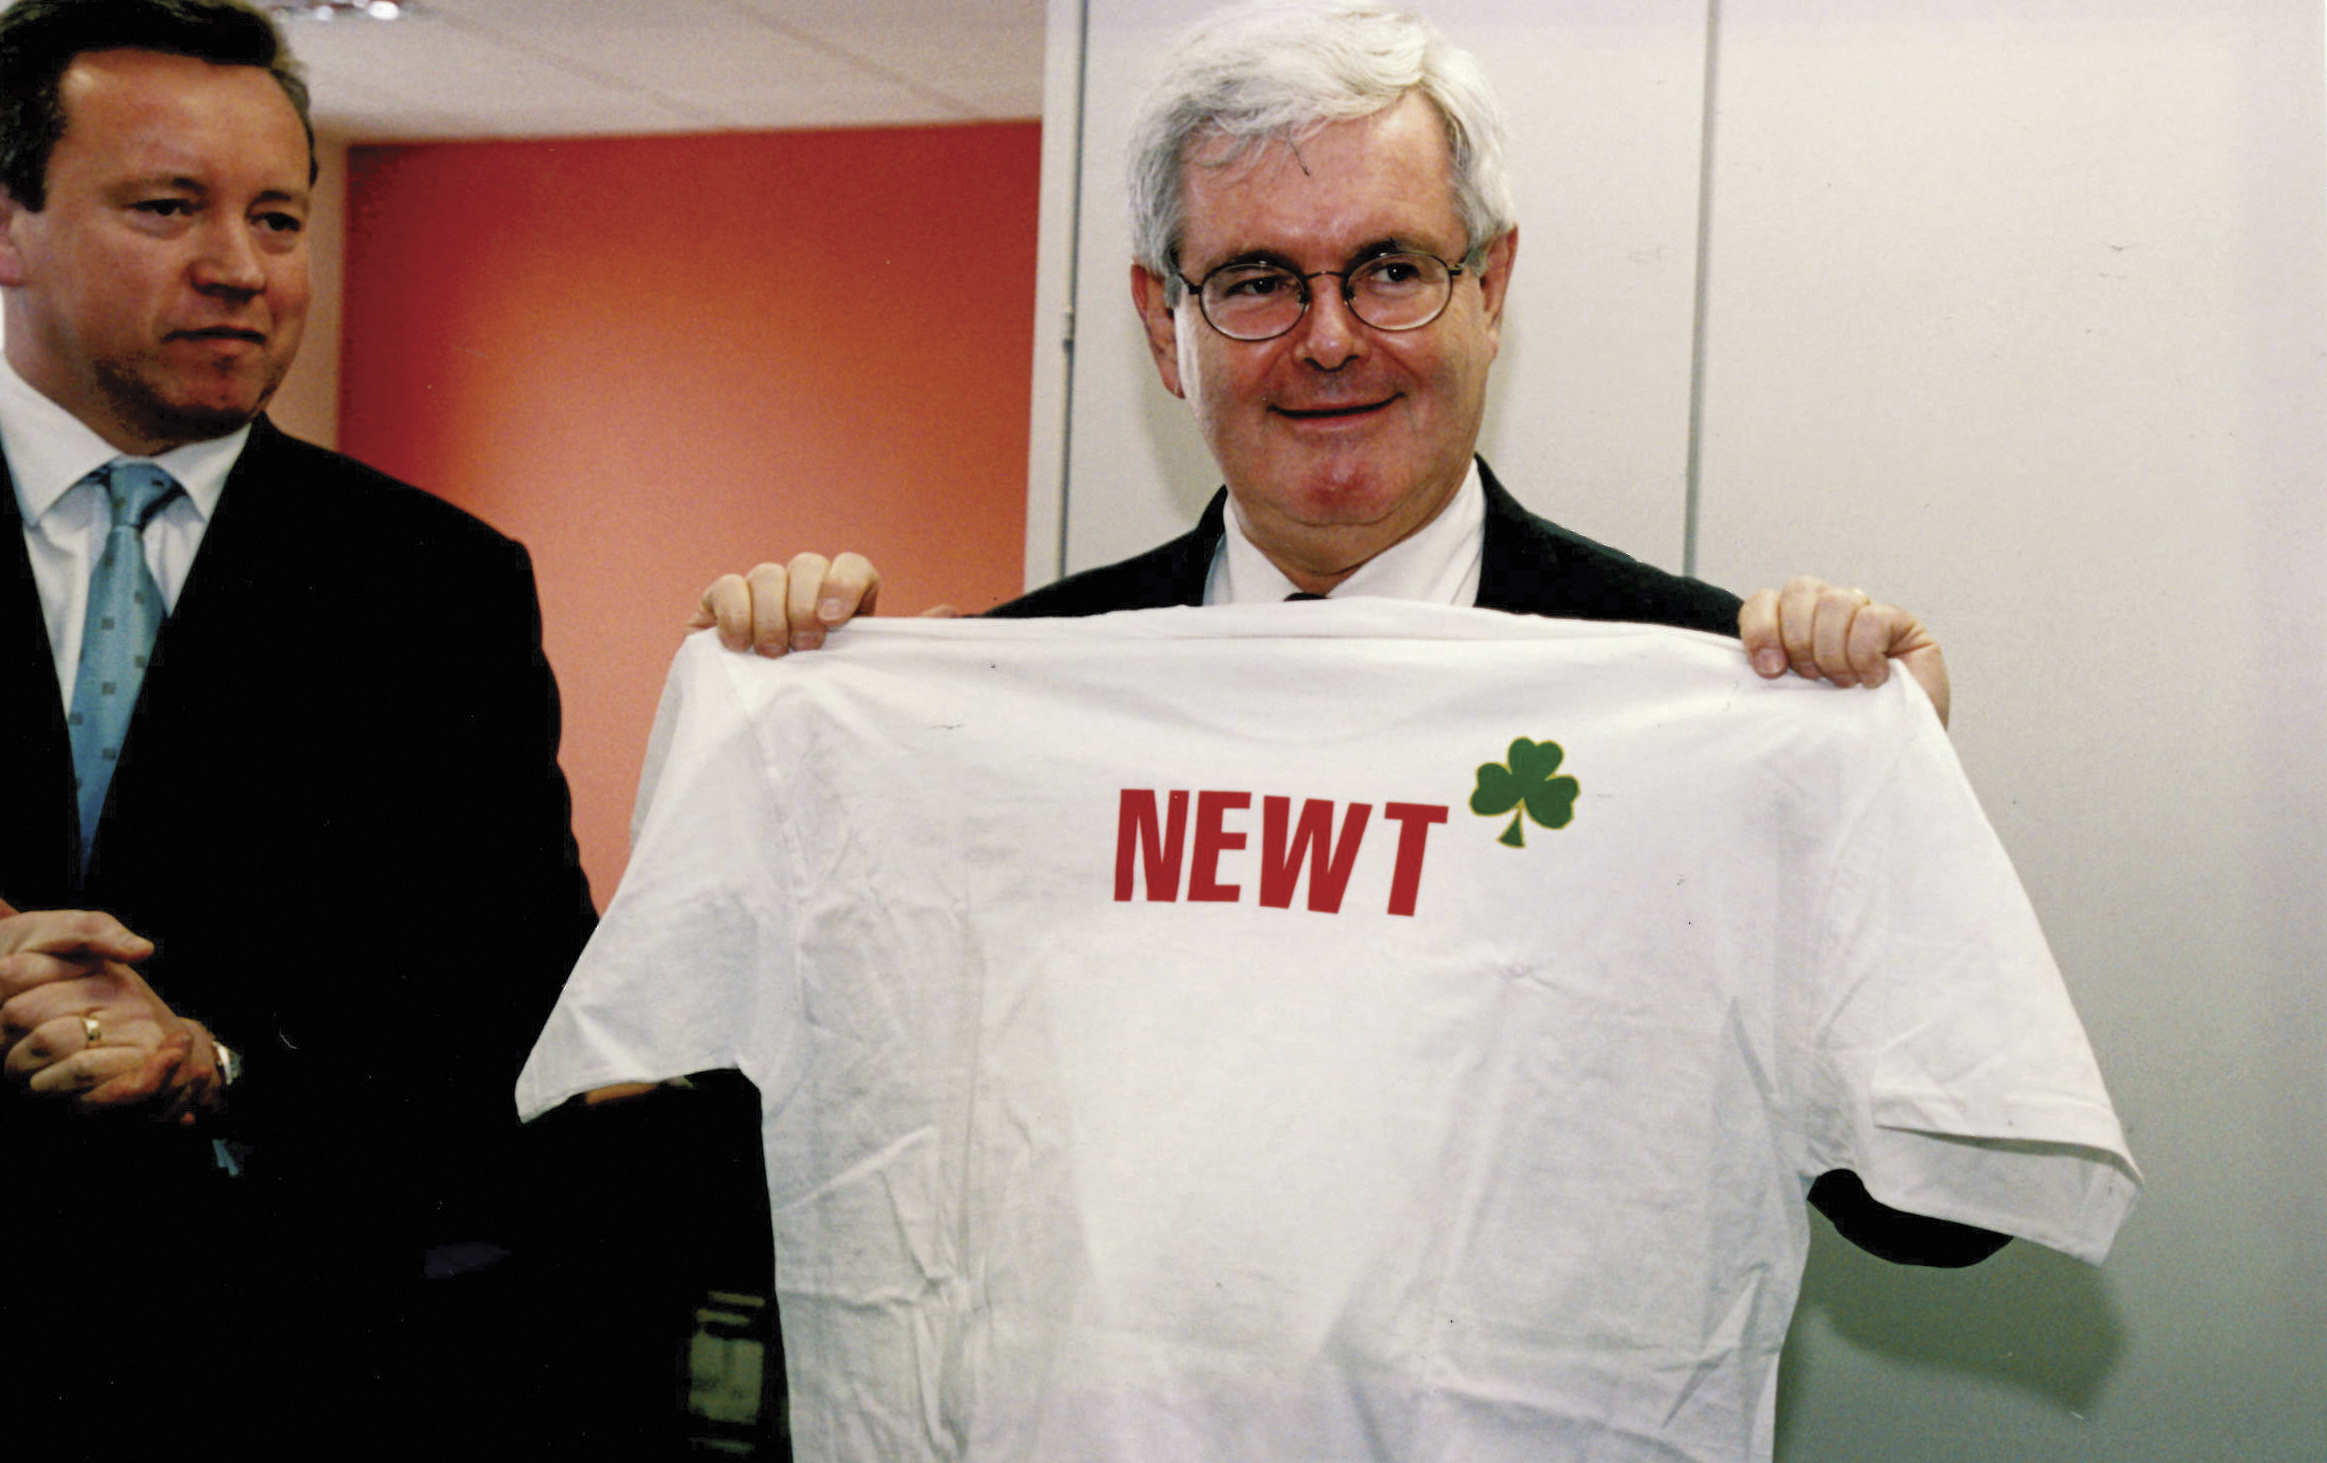 Having a light-hearted moment with Newt Gingrich.